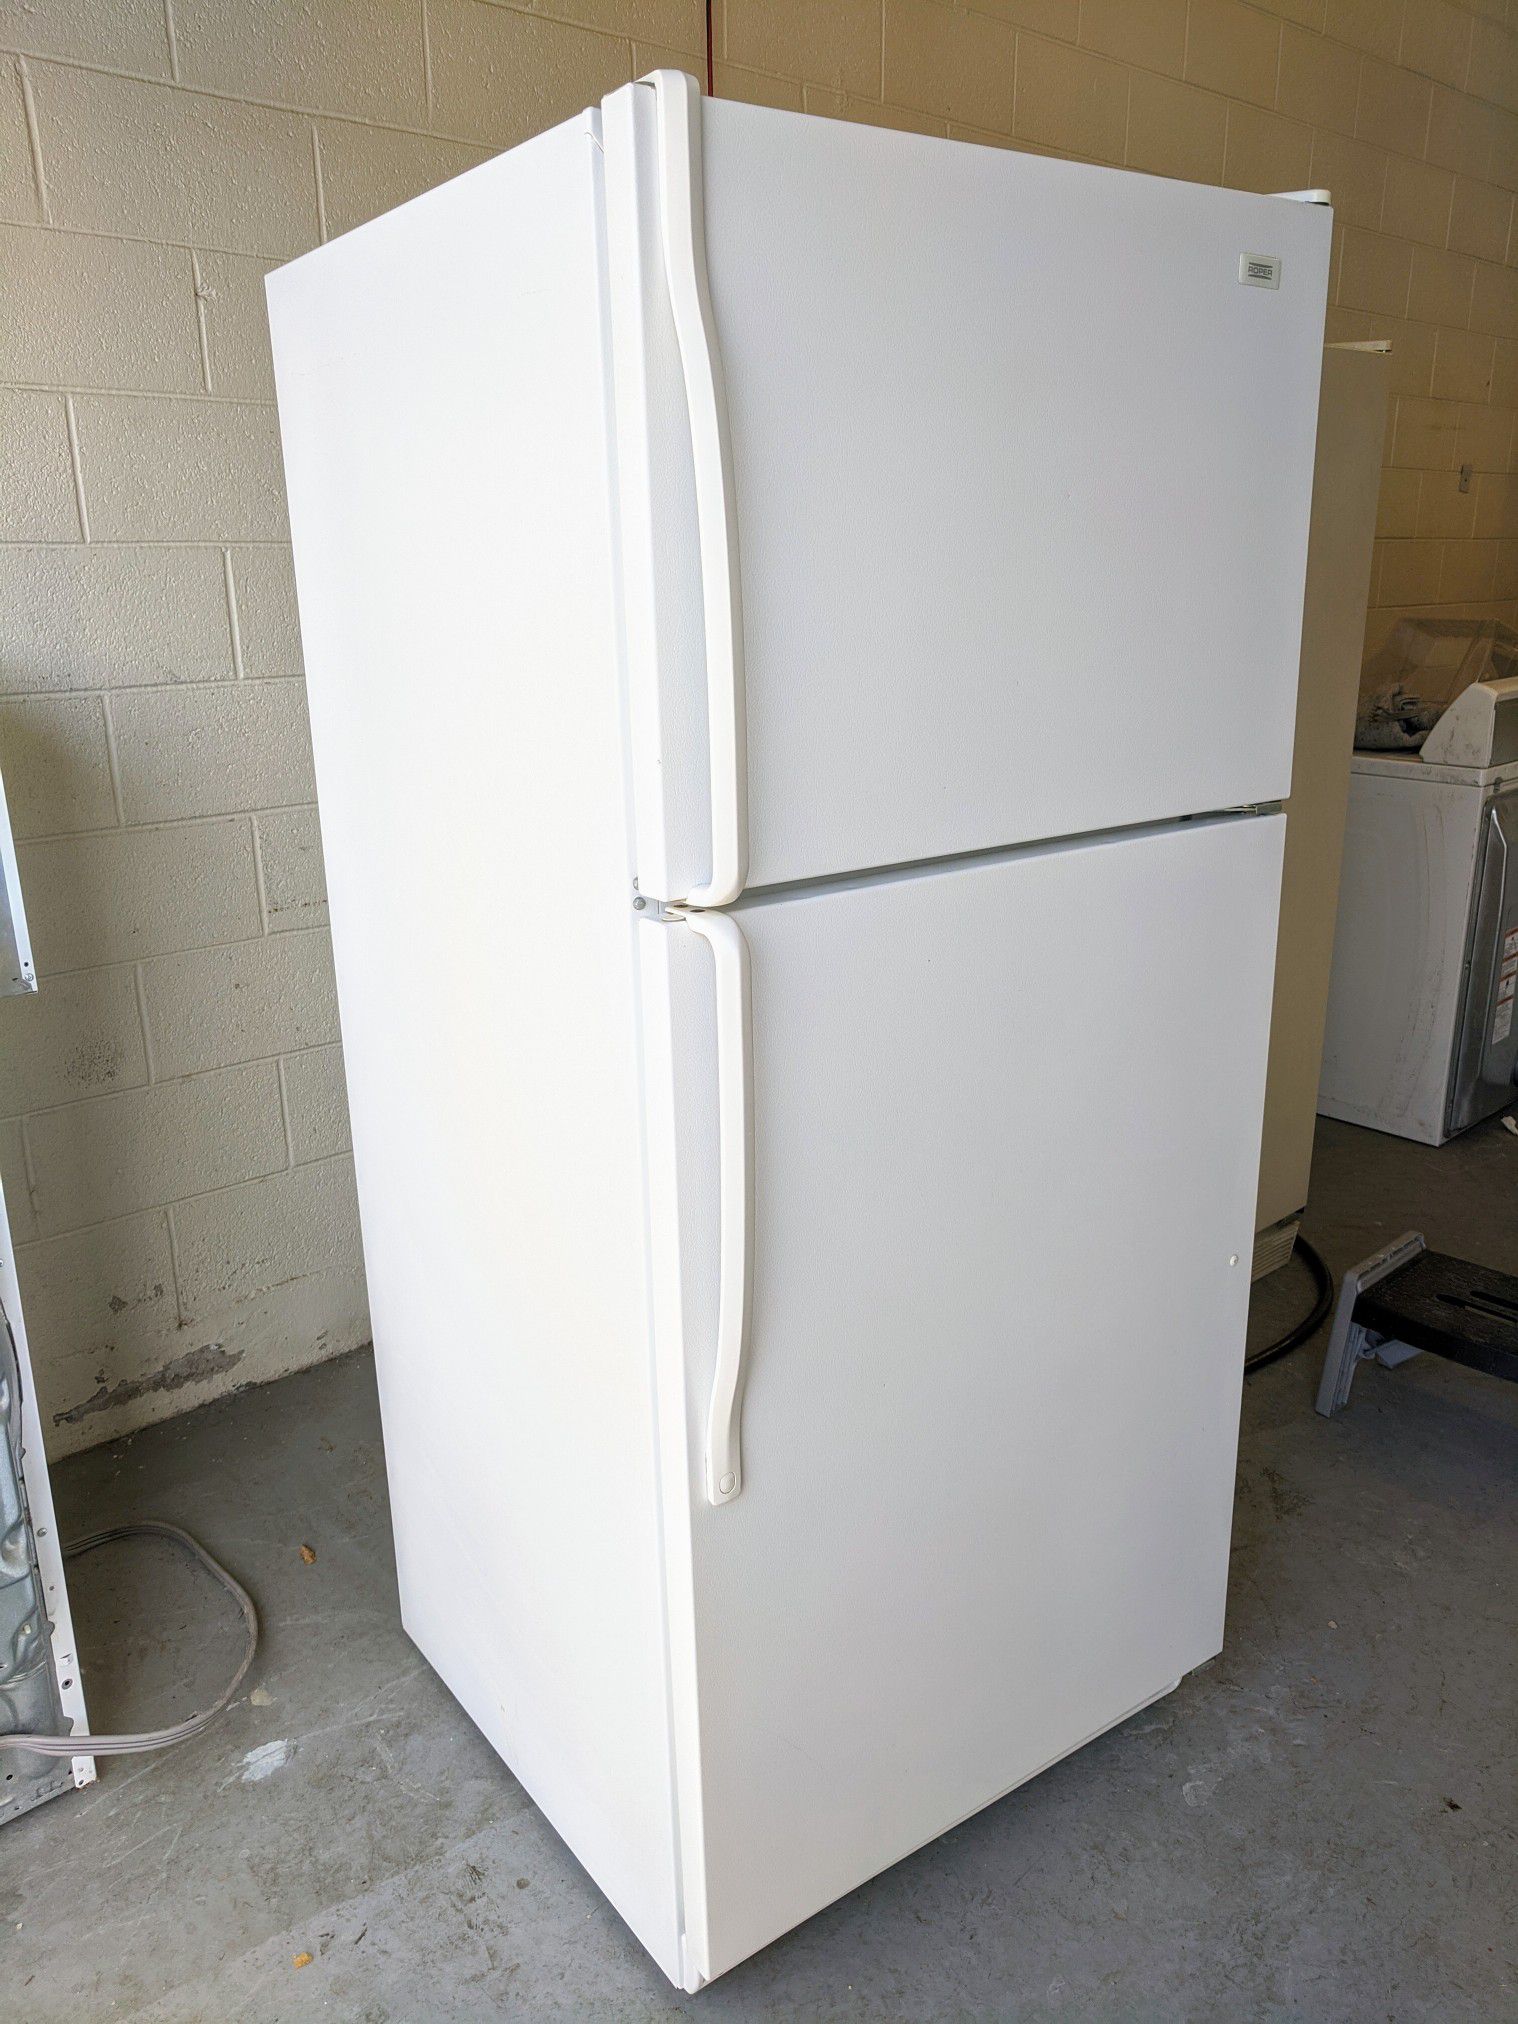 Refrigerator in Great Working Condition - Delivery Available